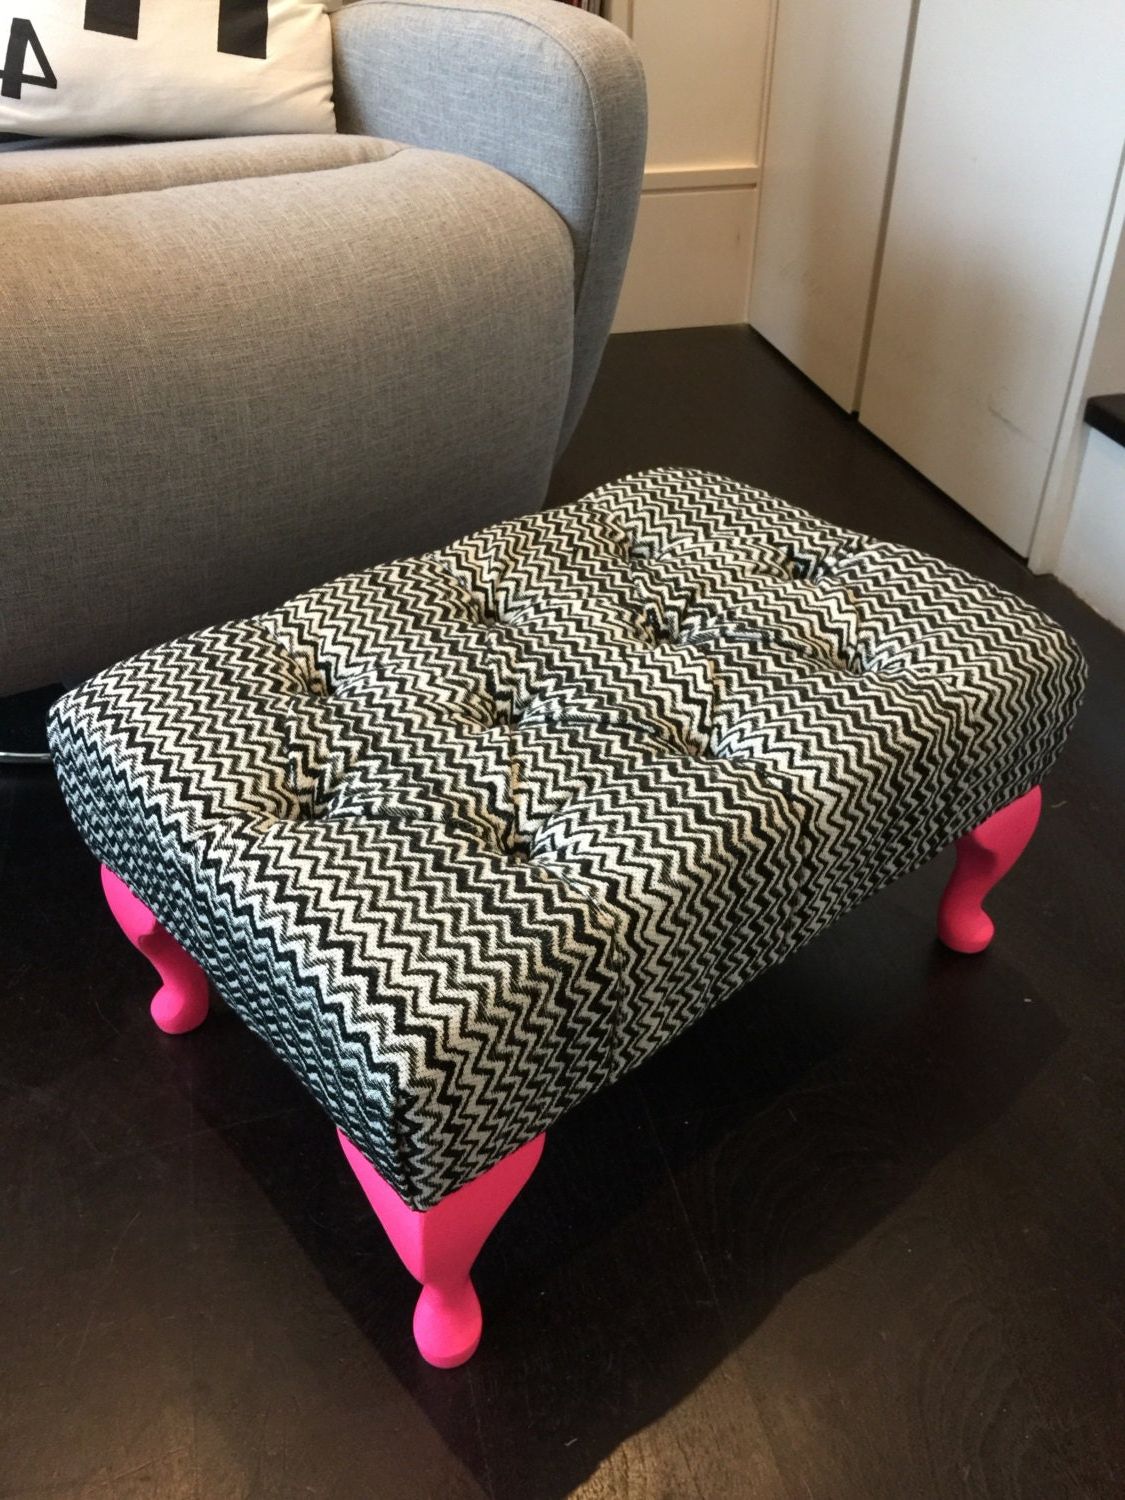 Upholstered Footstool, Pink Fabric (View 1 of 10)